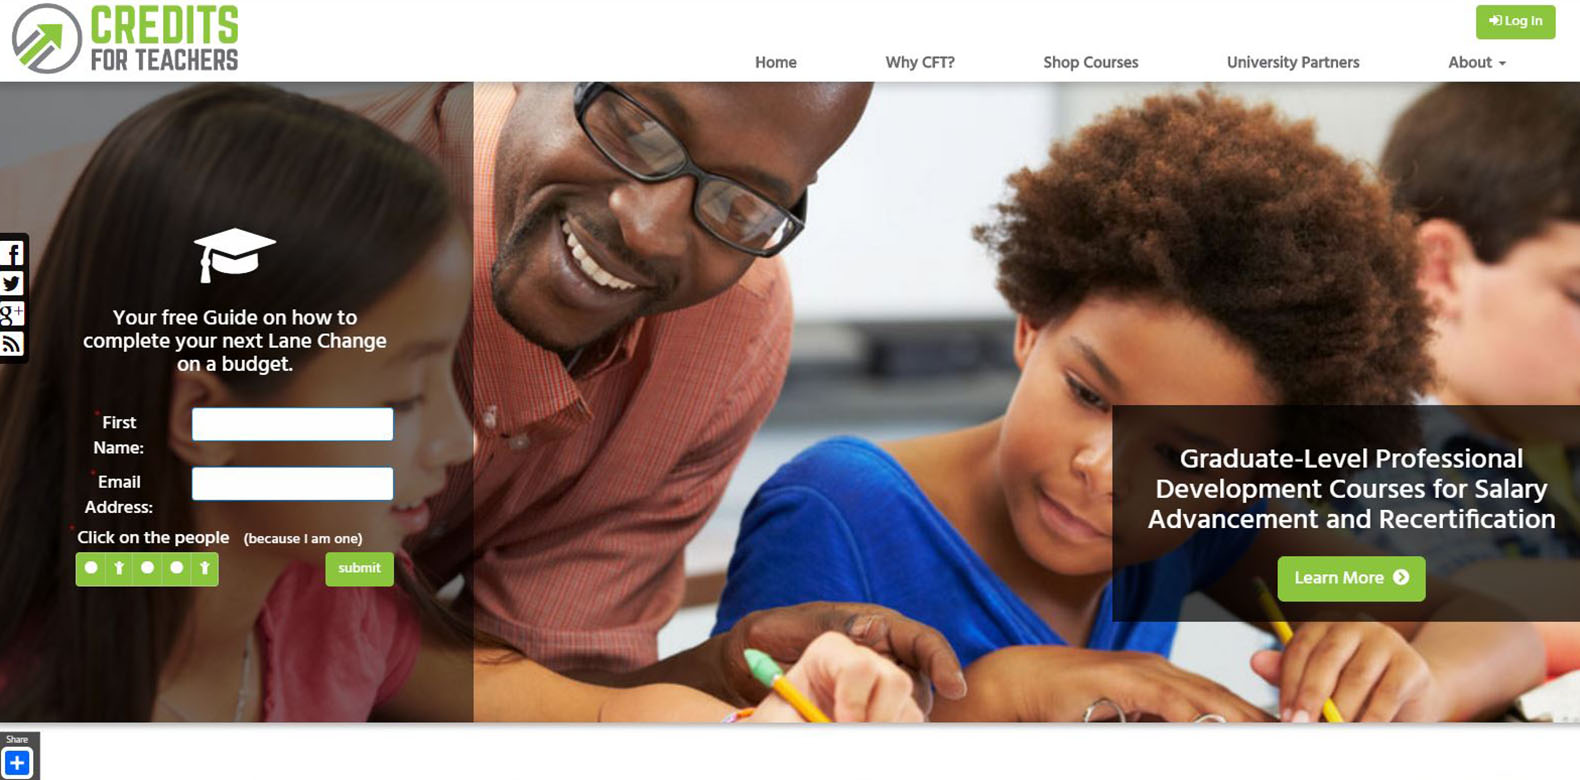 
New Website Launched: Credits for Teachers